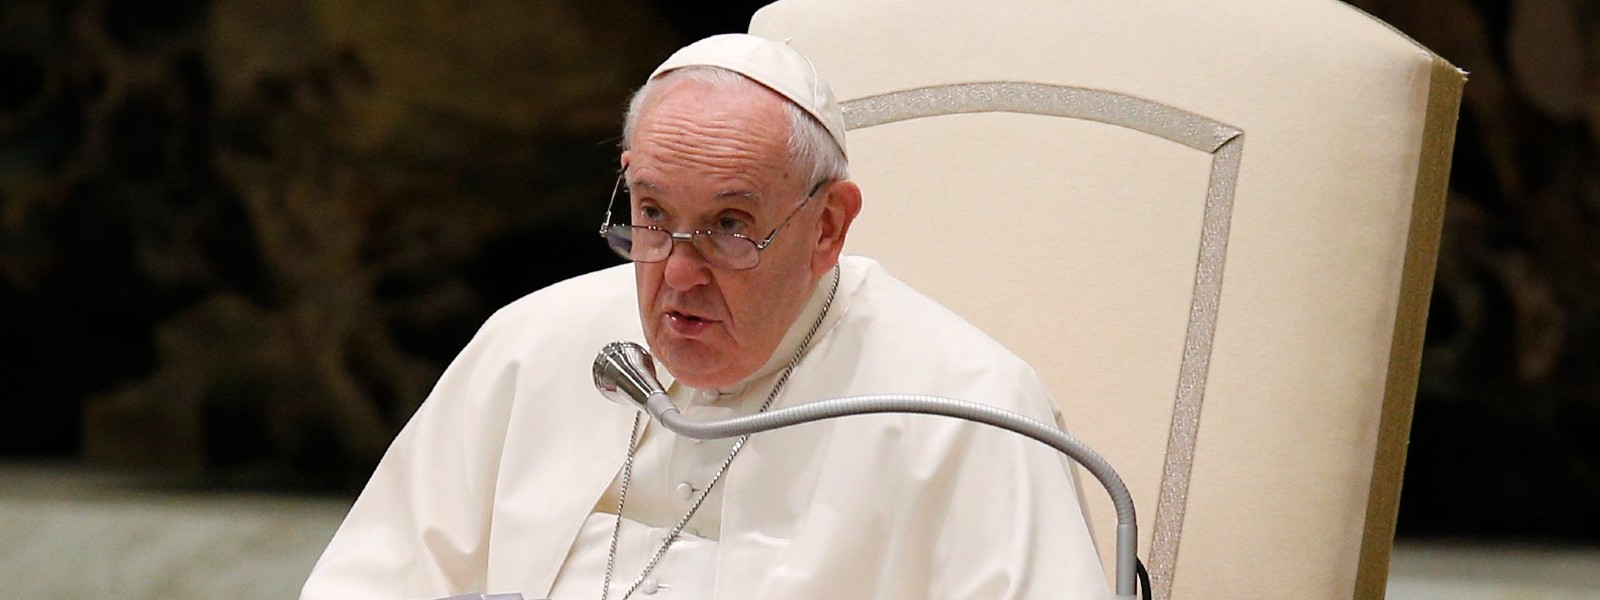 Pope Francis scheduled to leave hospital Saturday and be at Palm Sunday Mass